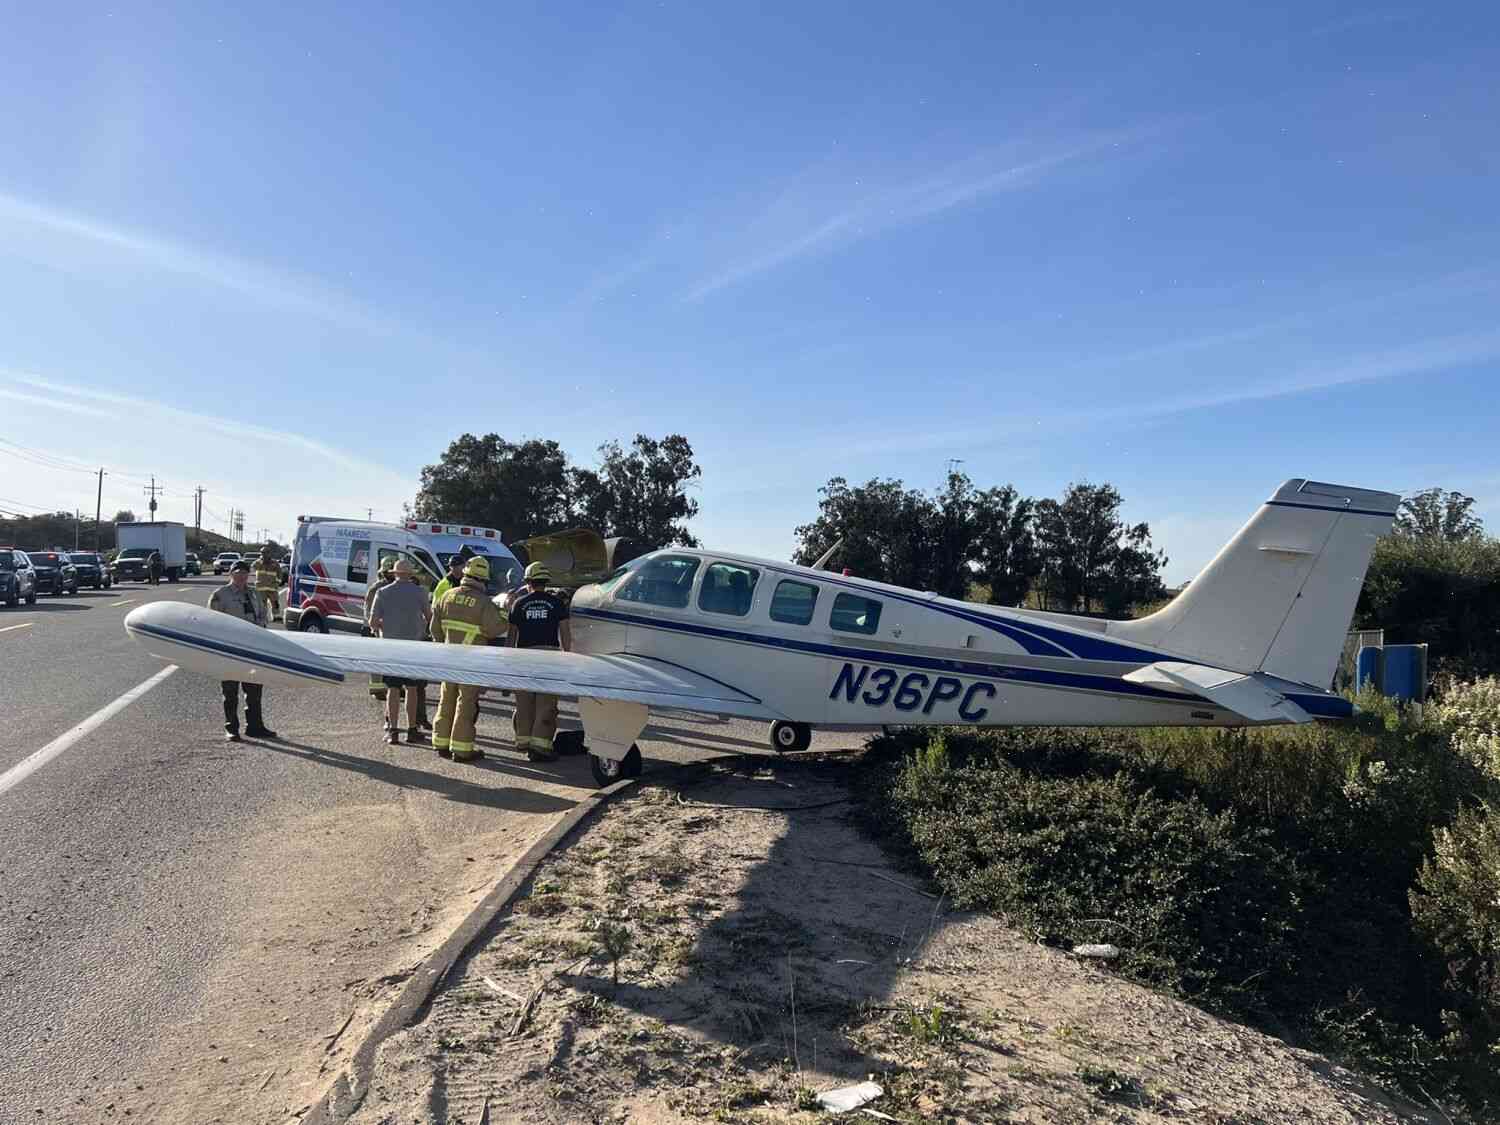 The plane crashed into the road after a man was injured by falling trees